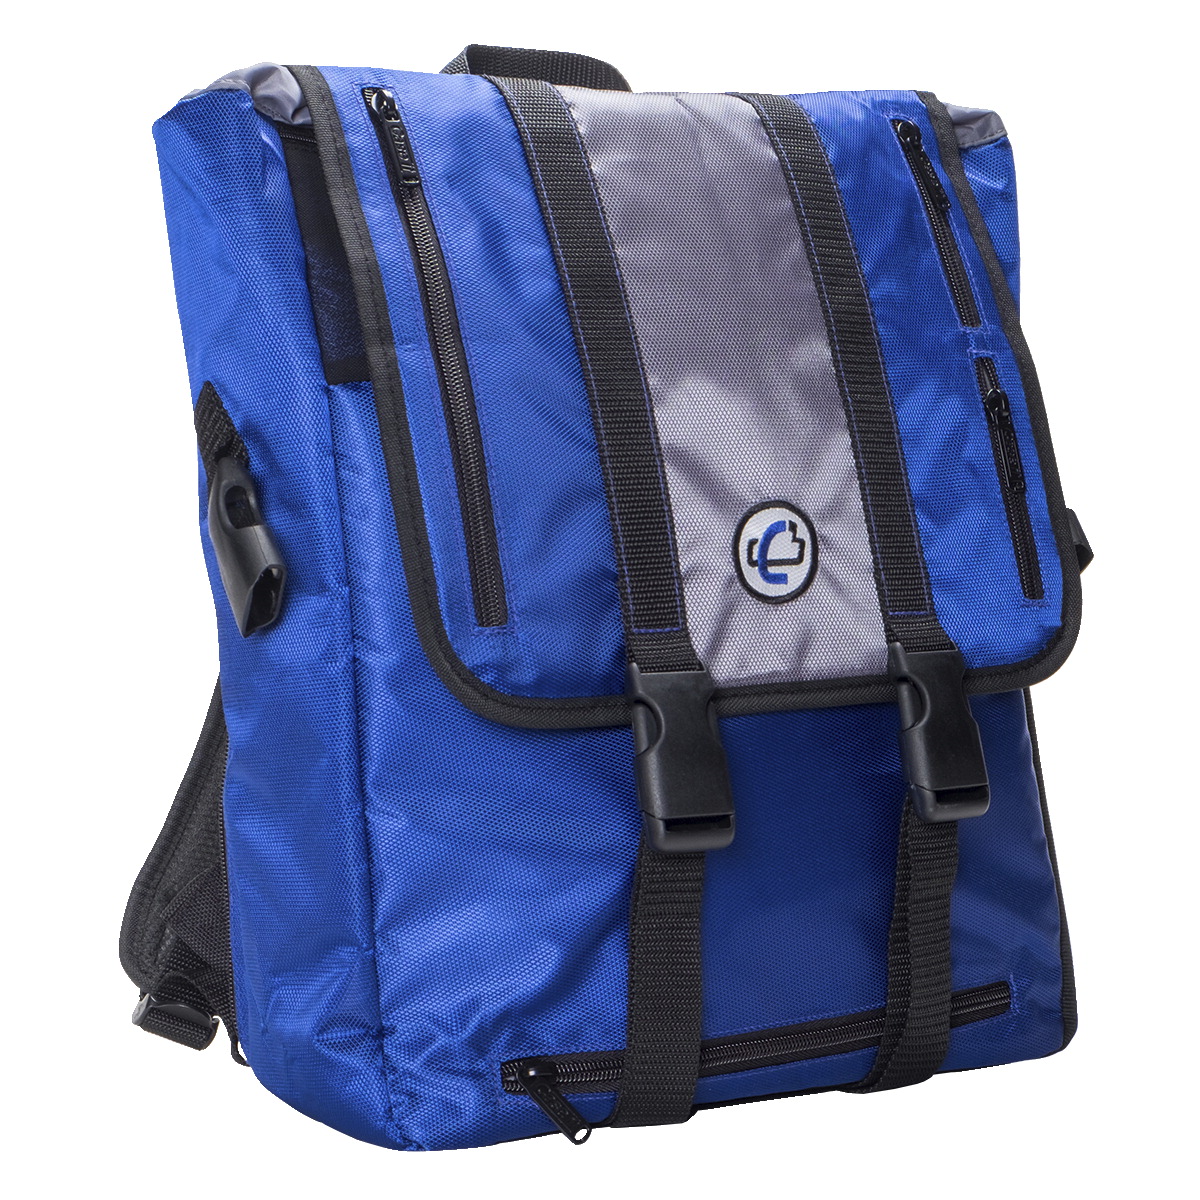 2004444 6 X 13 X 15 In. Backpack With Binder Holder, Blue With Grey Trim